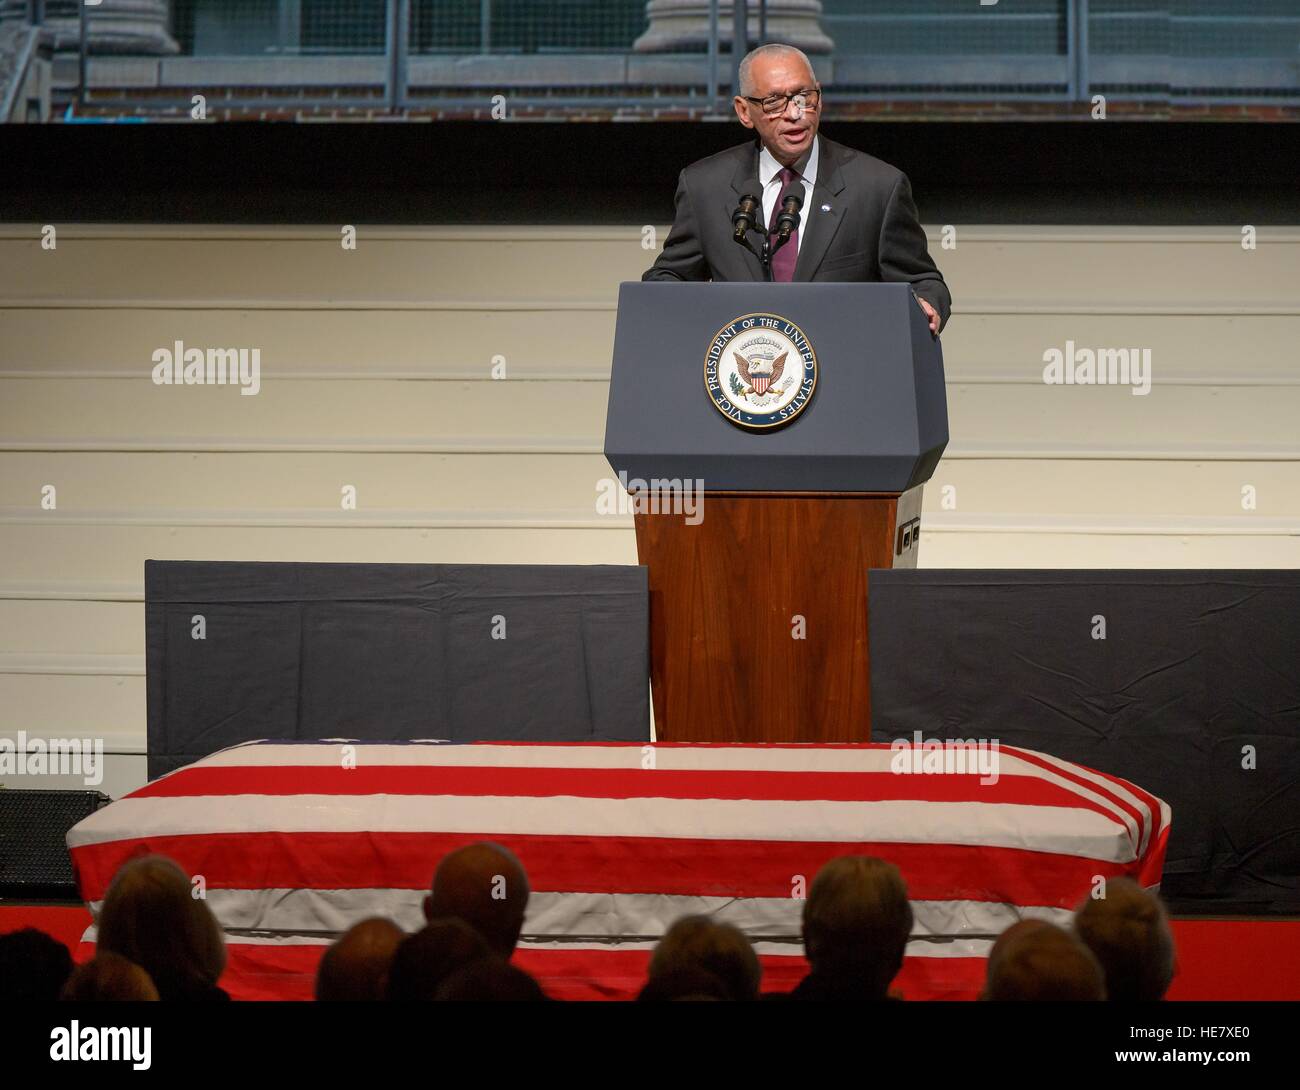 NASA Administrator Charles Bolden speaks during a service celebrating the life of former astronaut and U.S. Senator John Glenn during memorial service at Ohio State University December 17, 2016 in Columbus, Ohio. The former Marine pilot, Senator and first man to orbit the earth died last week at the age of 95. Stock Photo